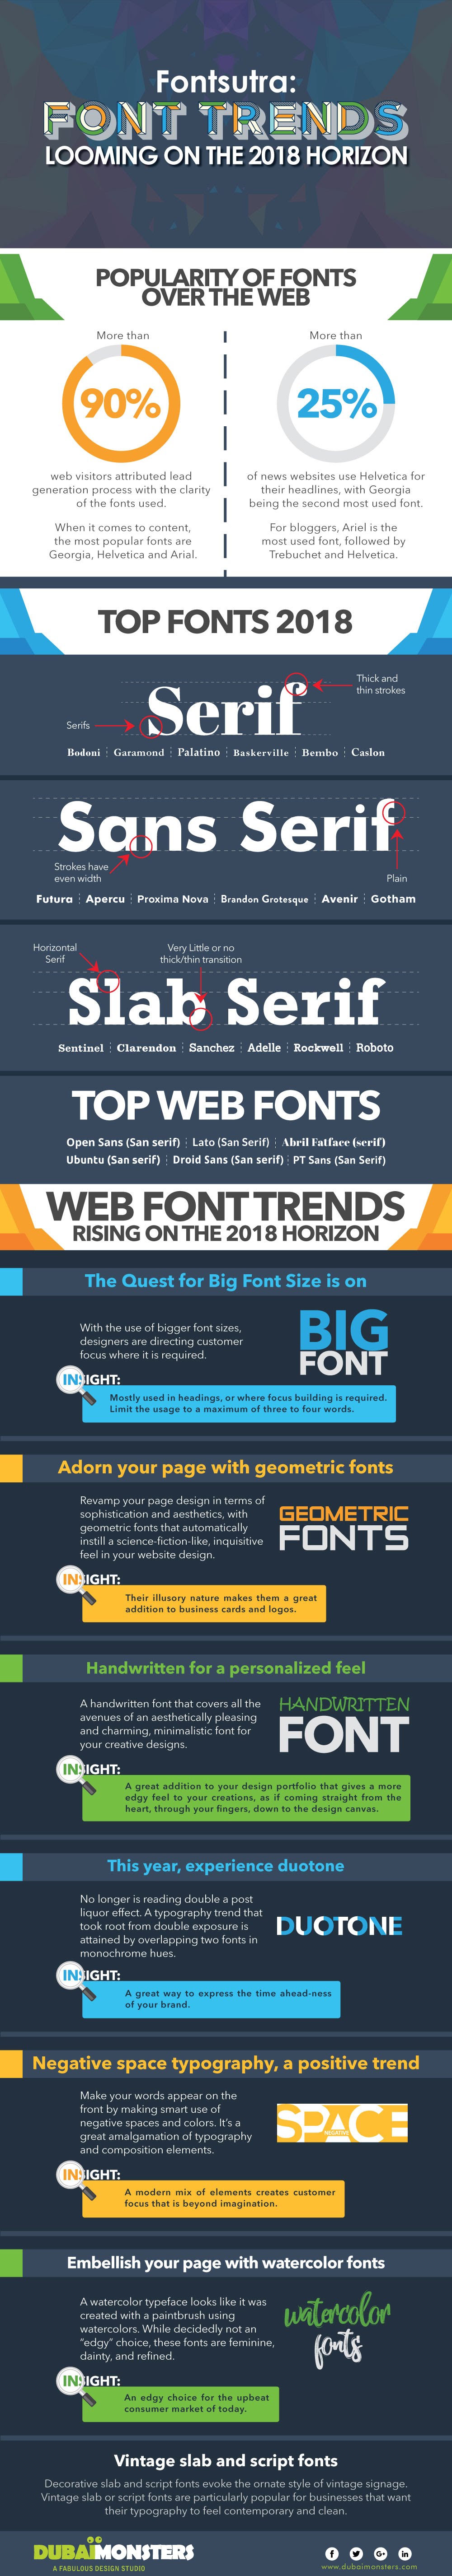 Fontsutra: Font Trends Looming on the 2018 Horizon – Infographic ...